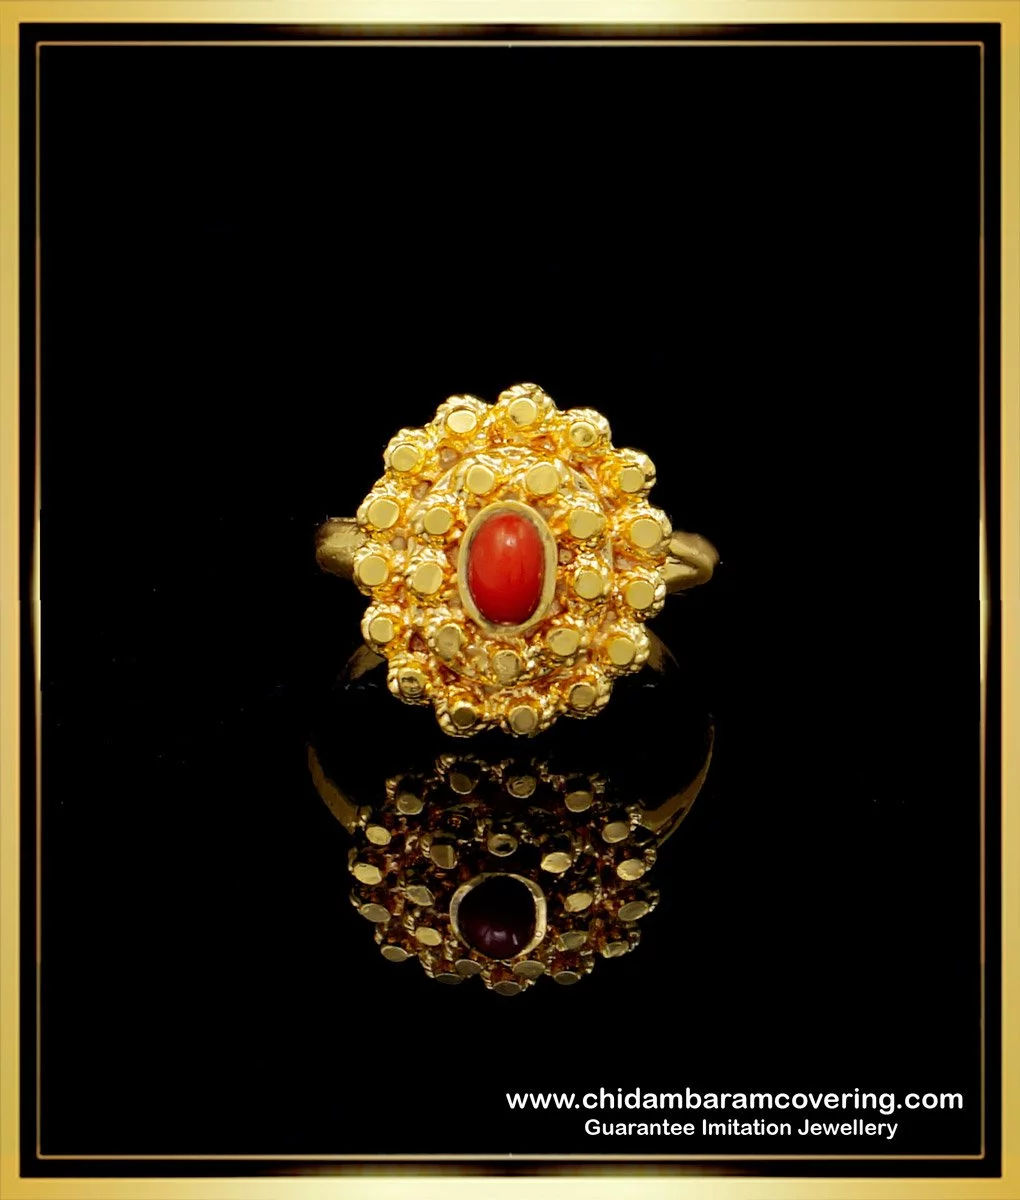 Buy quality Latest Design 22ct Ladies Gold Ring in Ahmedabad